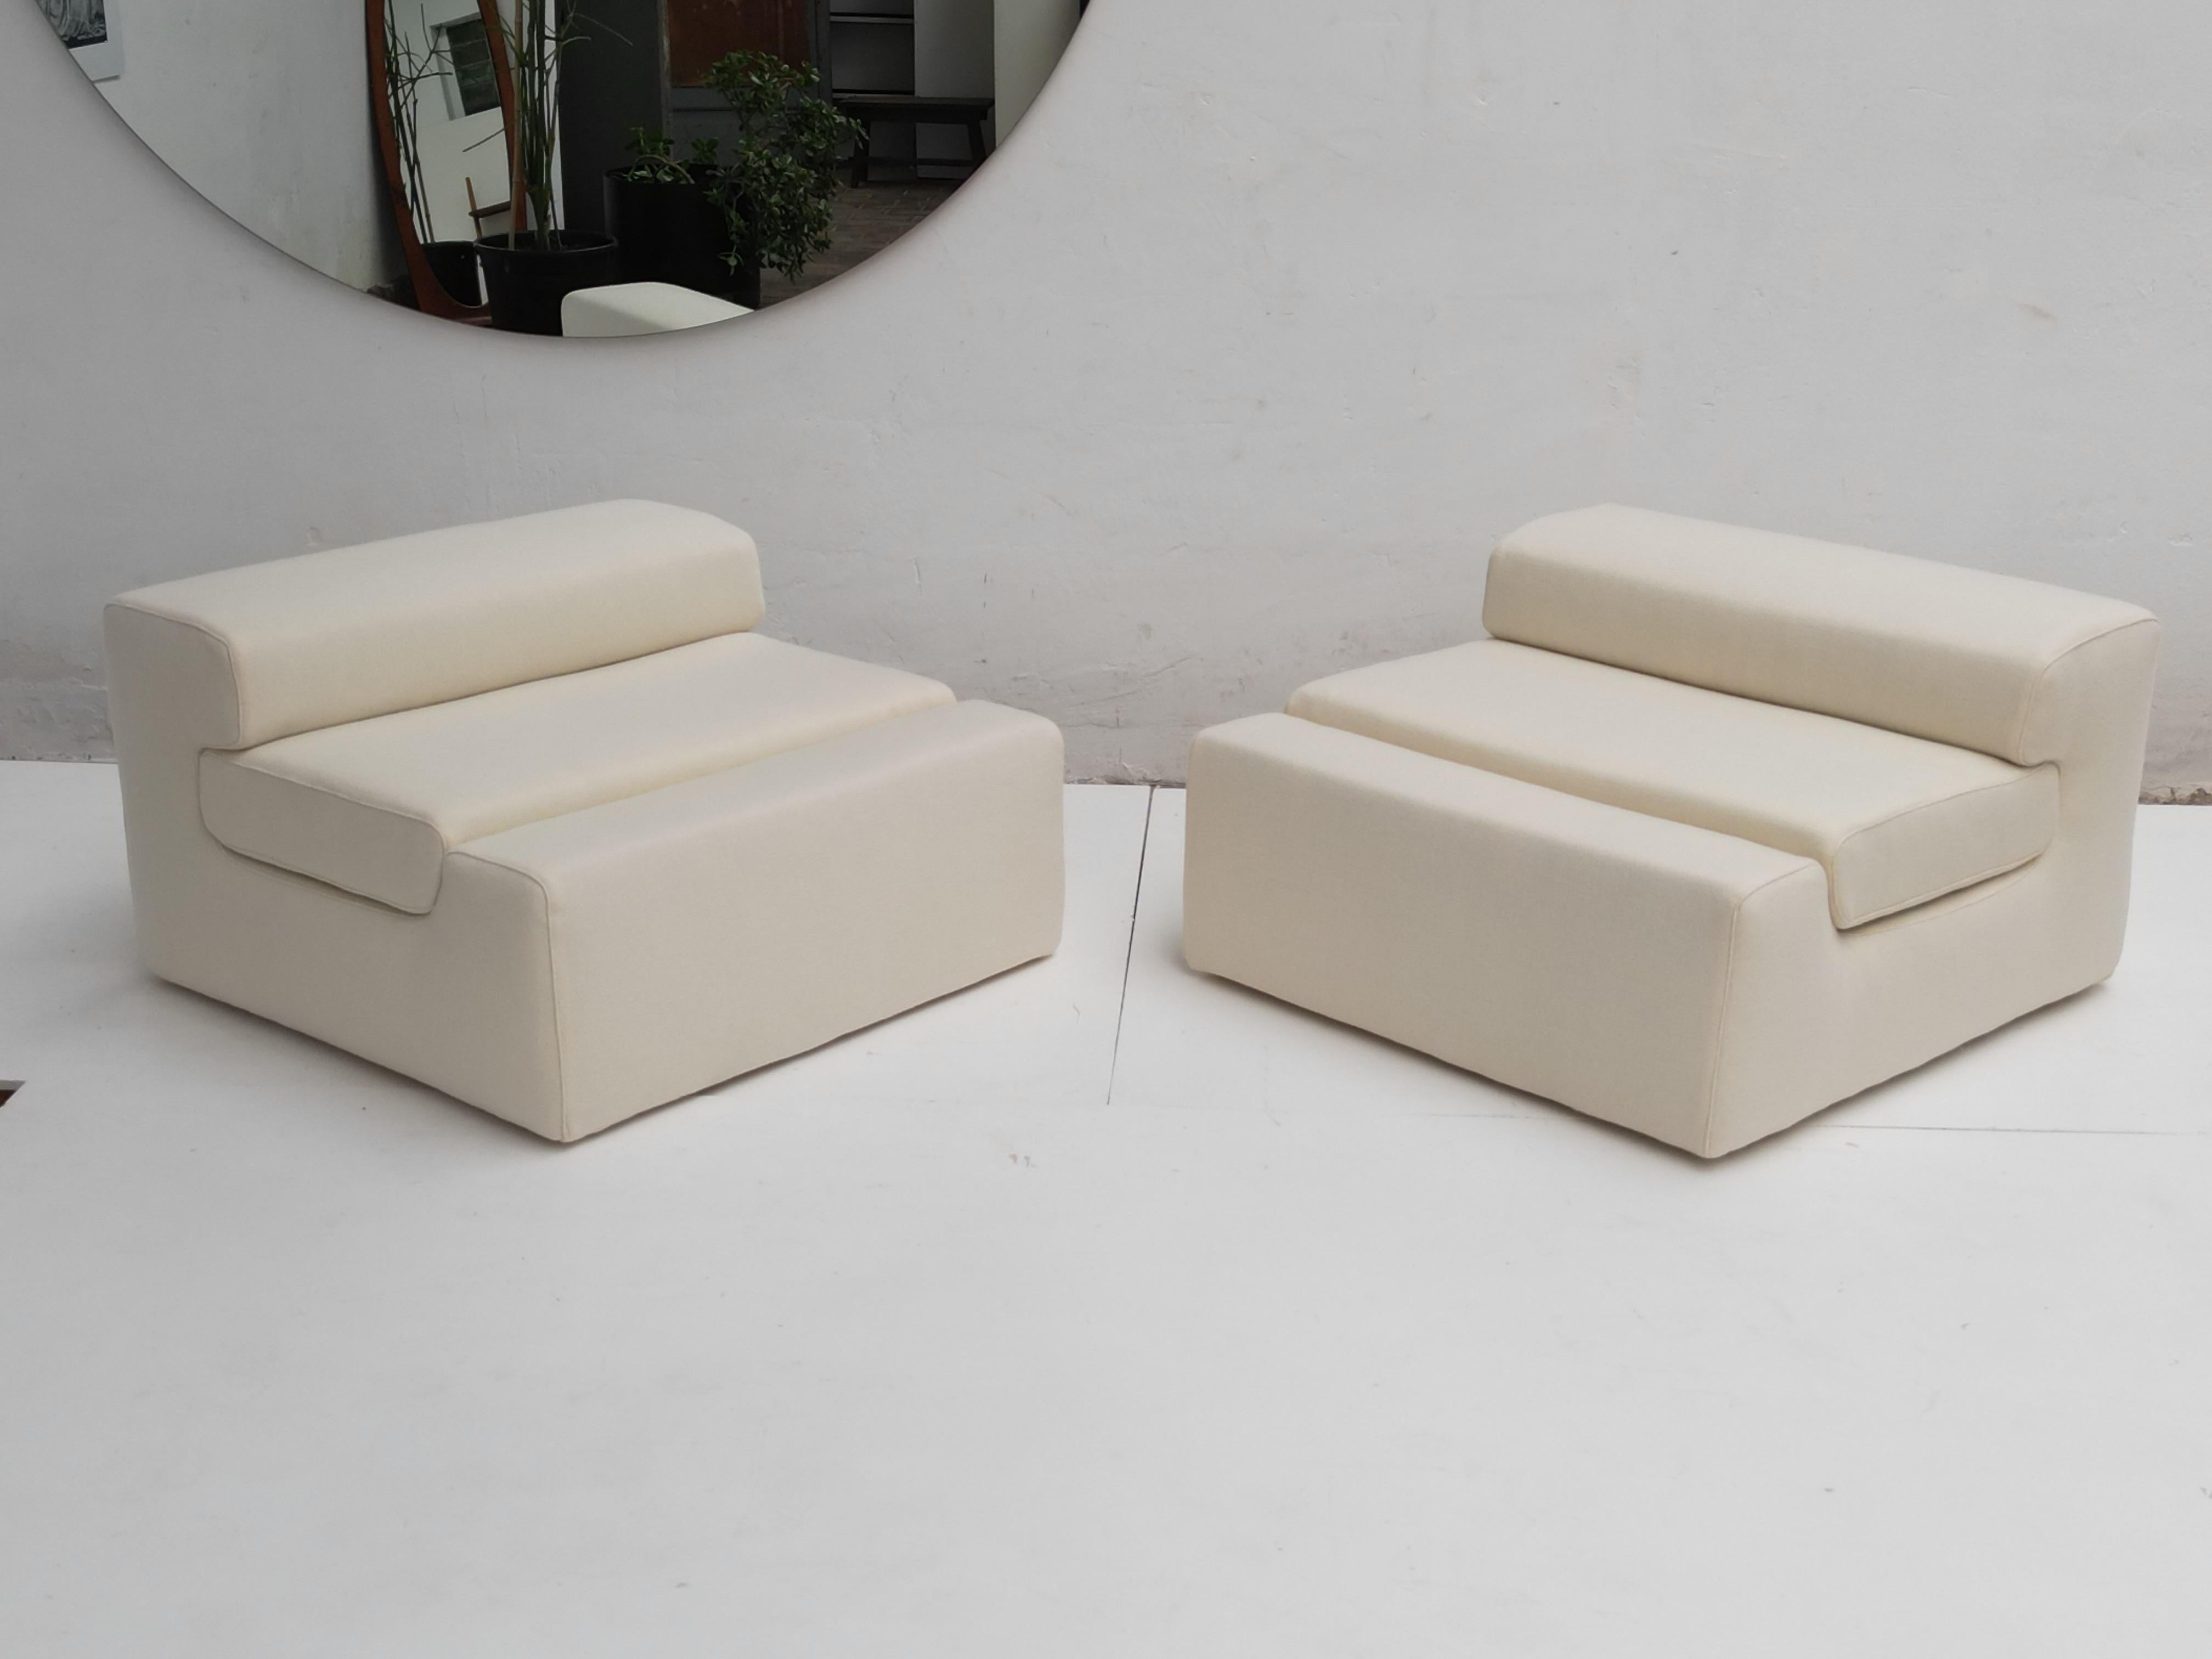 Extremely Rare Lounge Chairs Designed by Mangiarotti for the 'Casa Vitale' 1969  For Sale 1